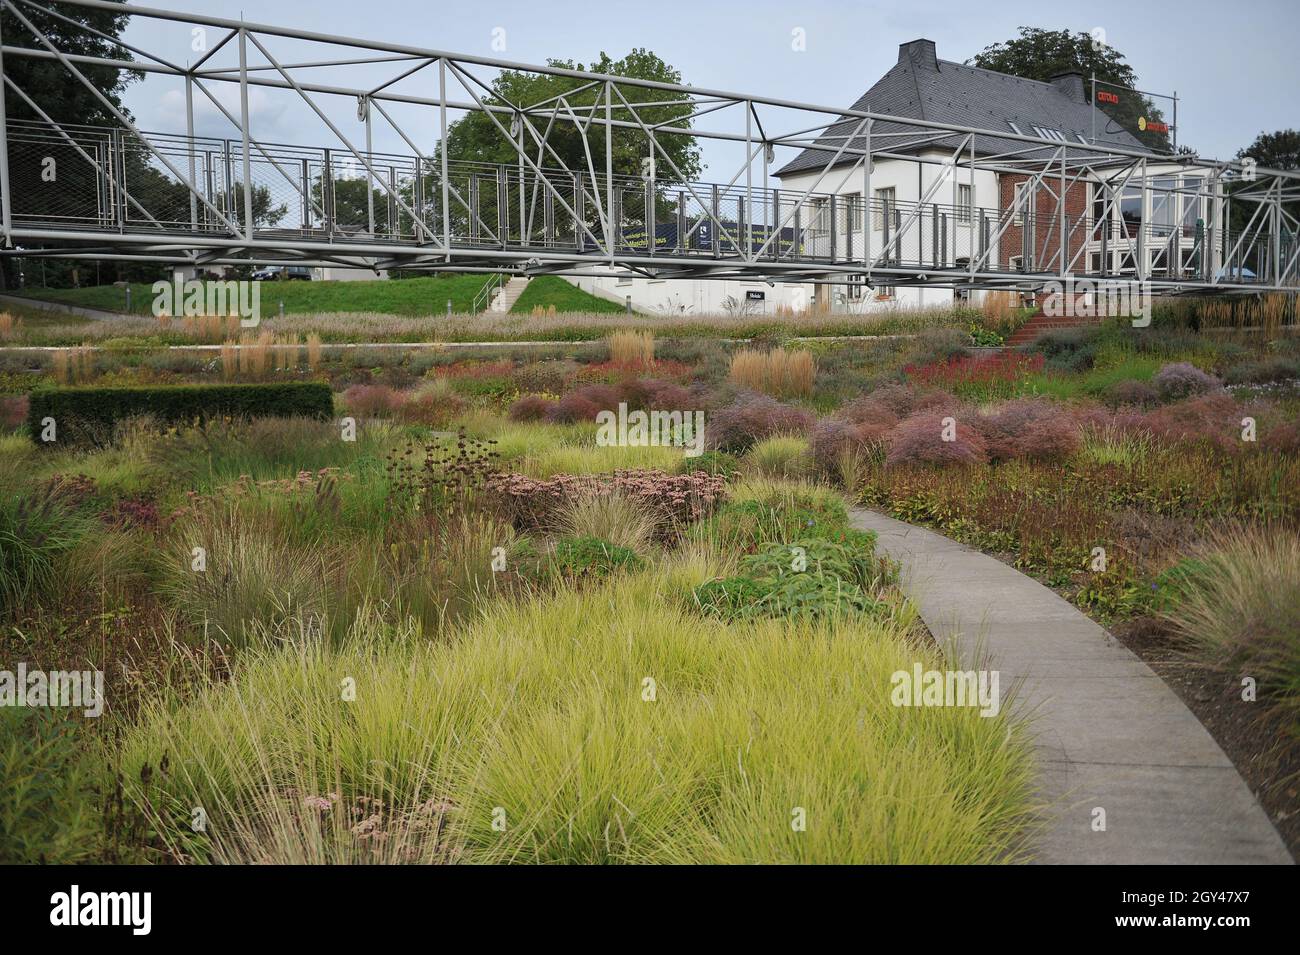 BOTTROP, GERMANY - 21 AUGUST 2021: Planting in perennial meadow style designed by Piet Oudolf in the public Berne Park Stock Photo